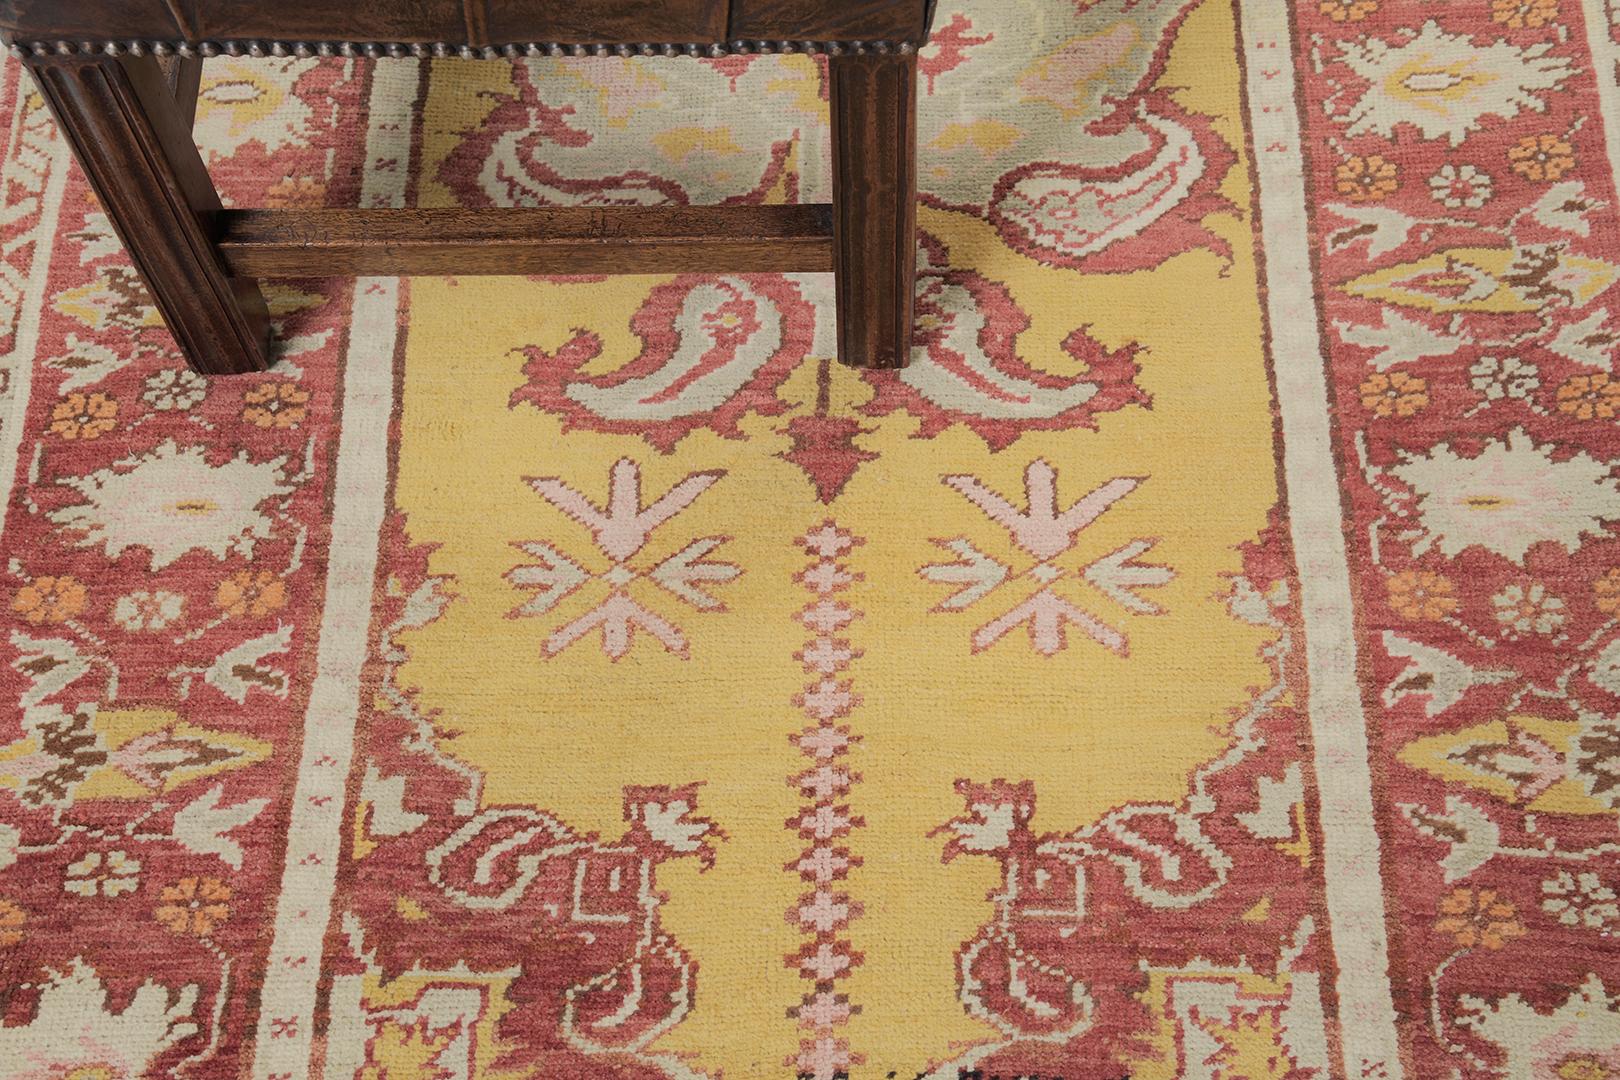 This elegant and timeless Turkish Anatolian rug made from vegetable dye has intricate and clear mirrored patterns all over the design. Guney has a blooming red color palette and golden yellow at its core perfectly matches the neutral motifs